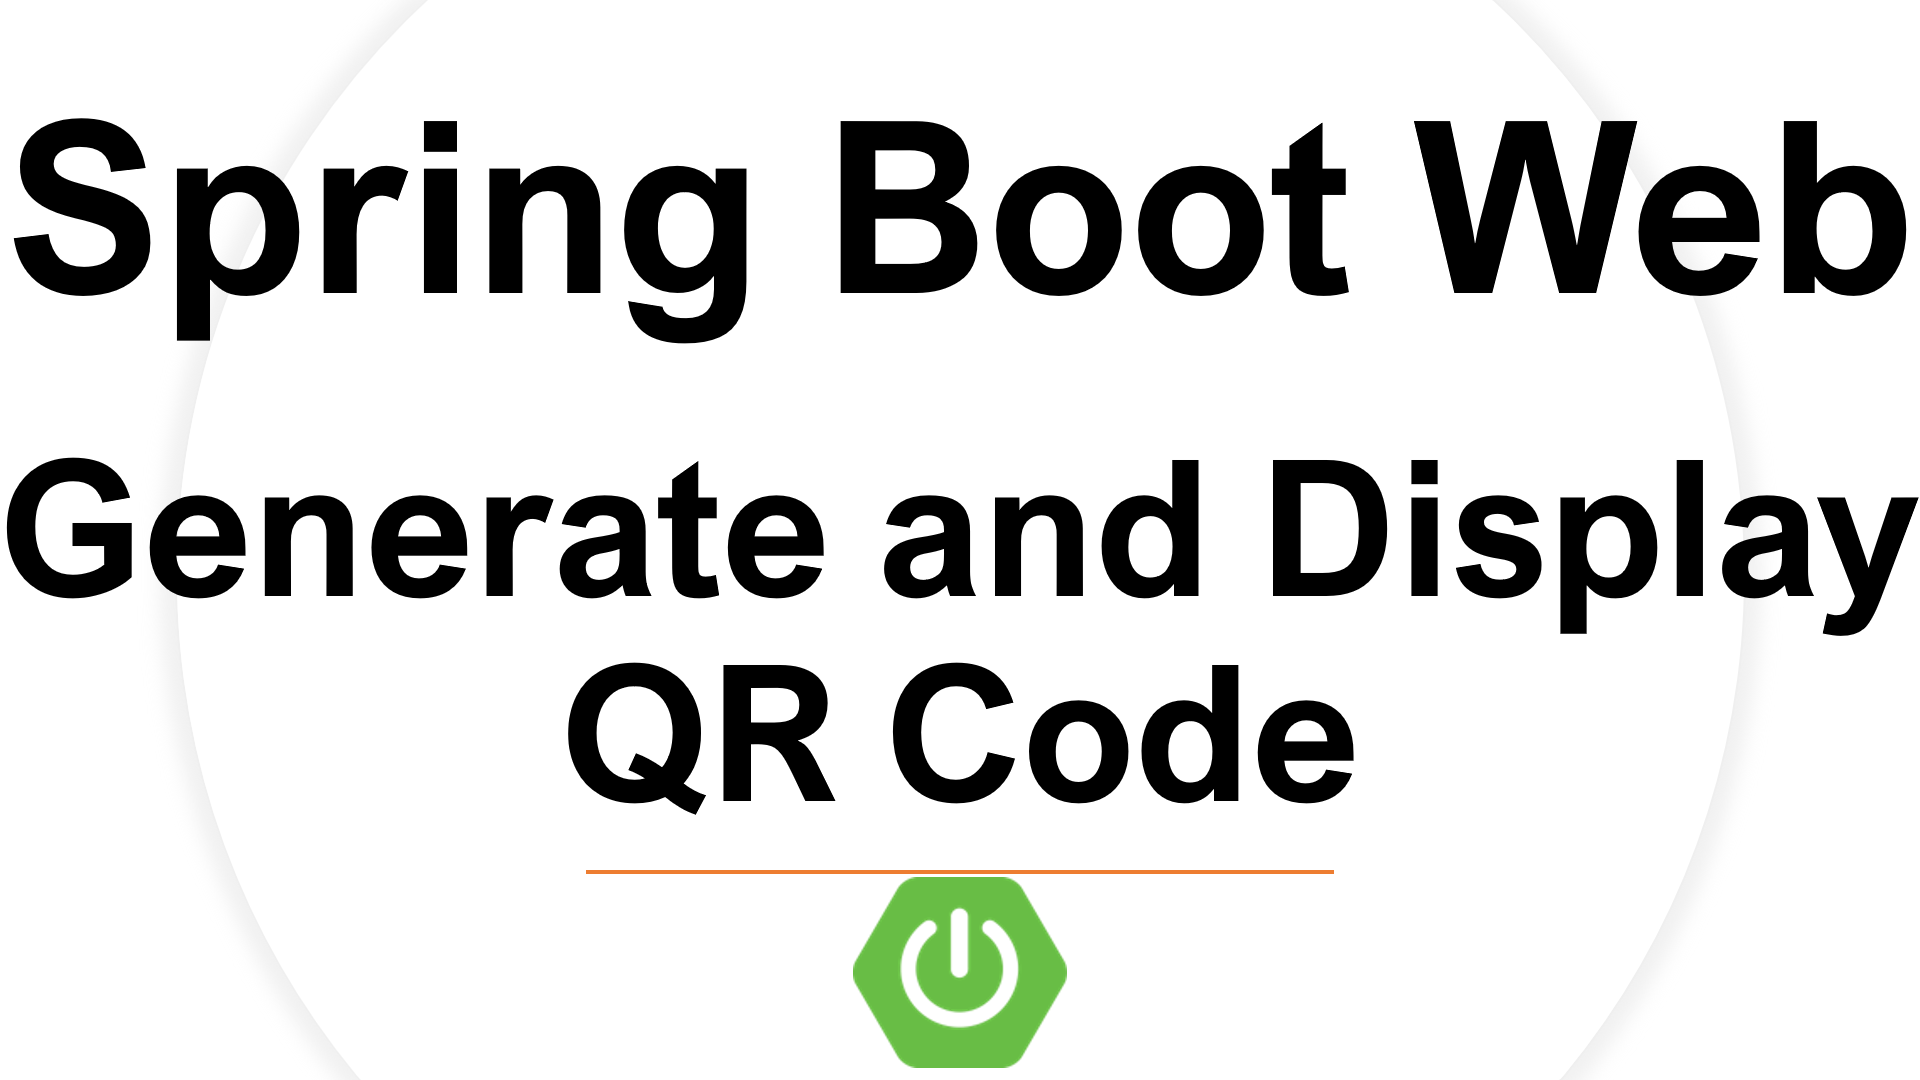 Spring Boot Web Generate and Display QR Code